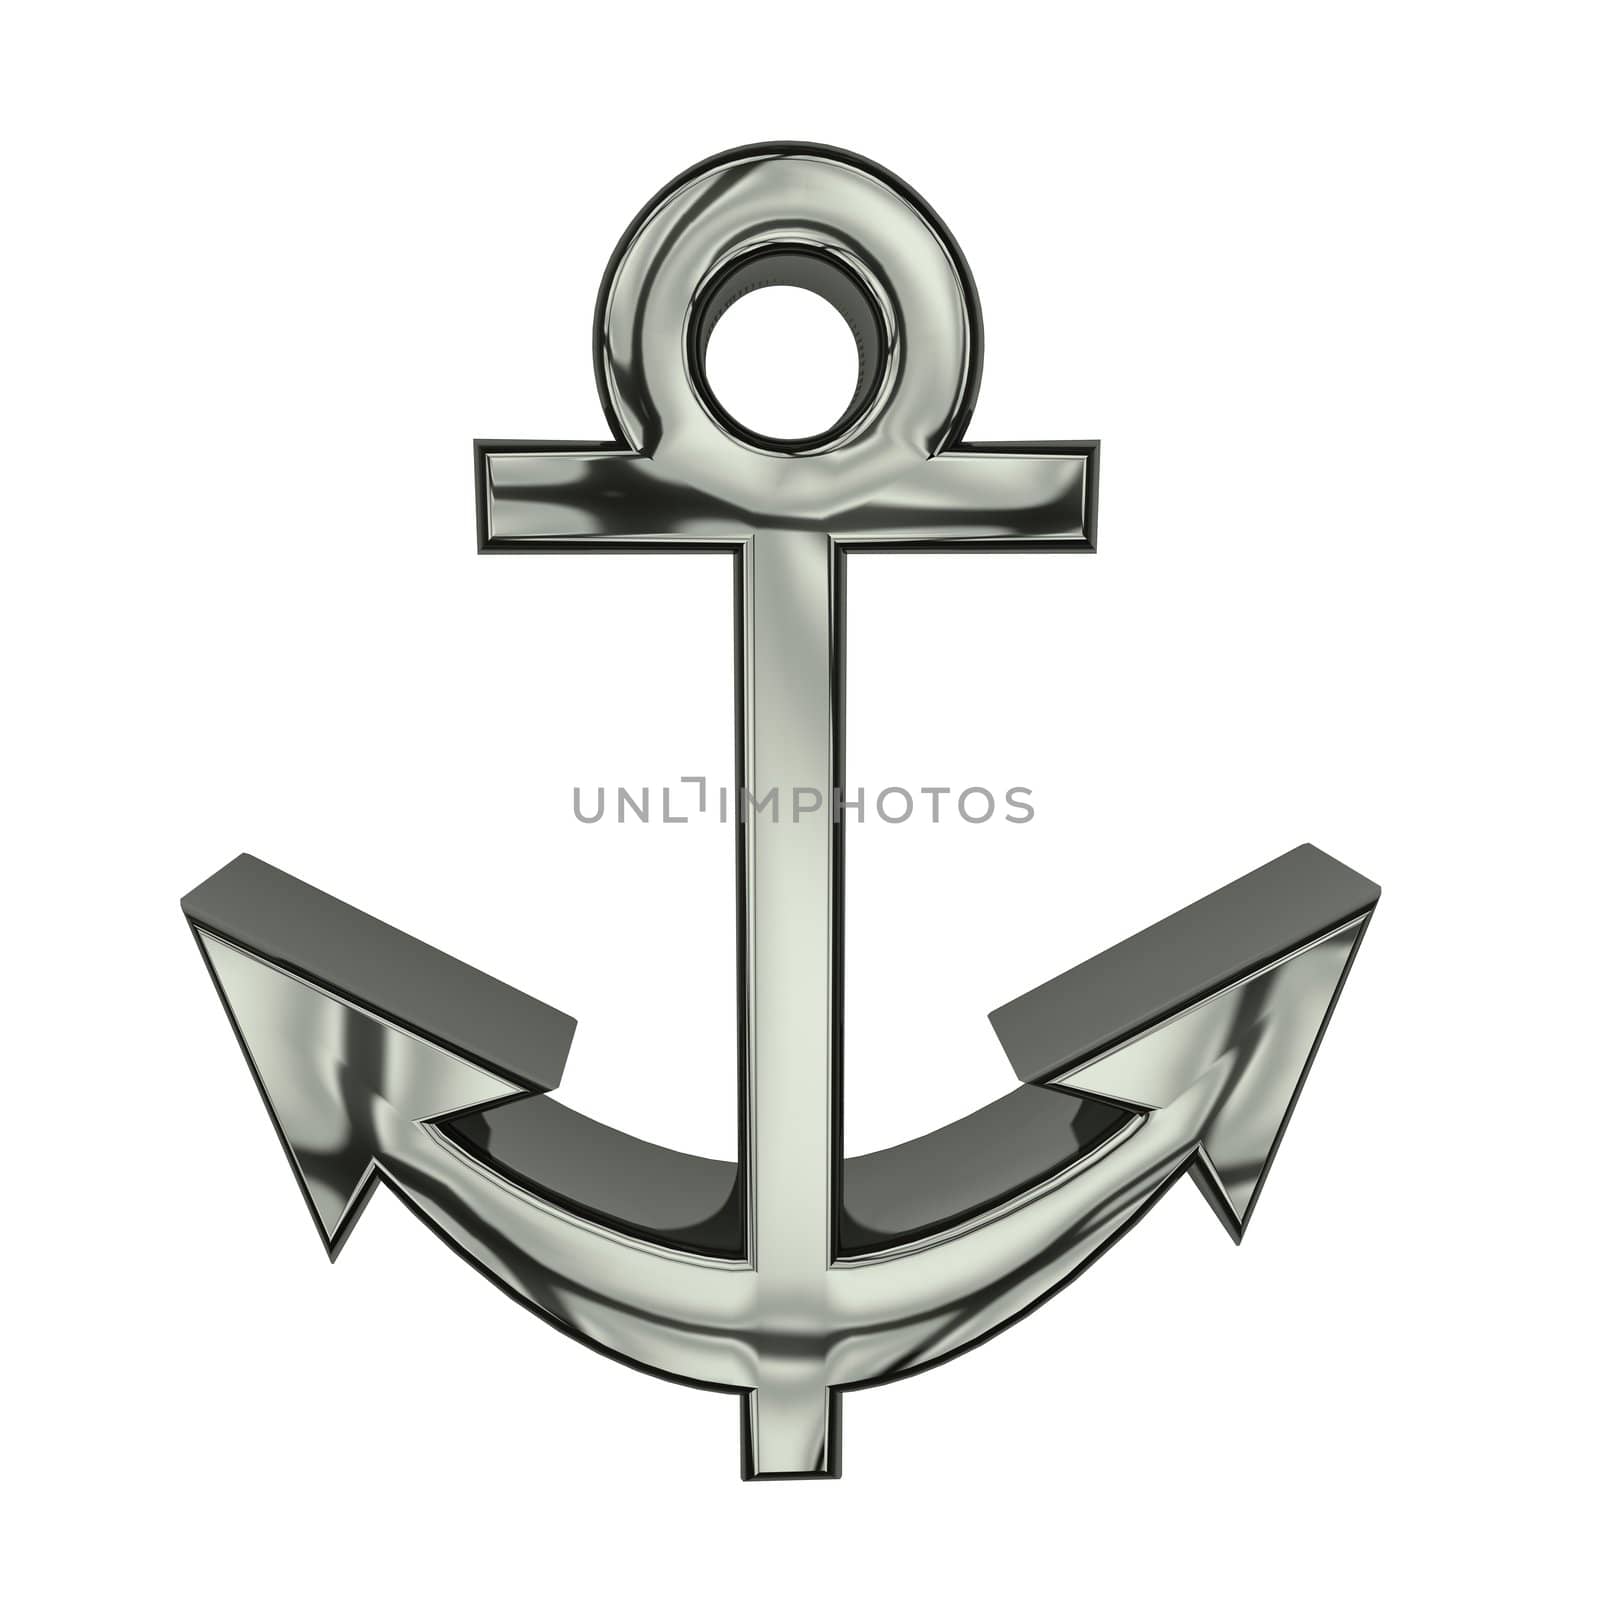 The anchor is the symbol of distant worlds, long trips and freedom